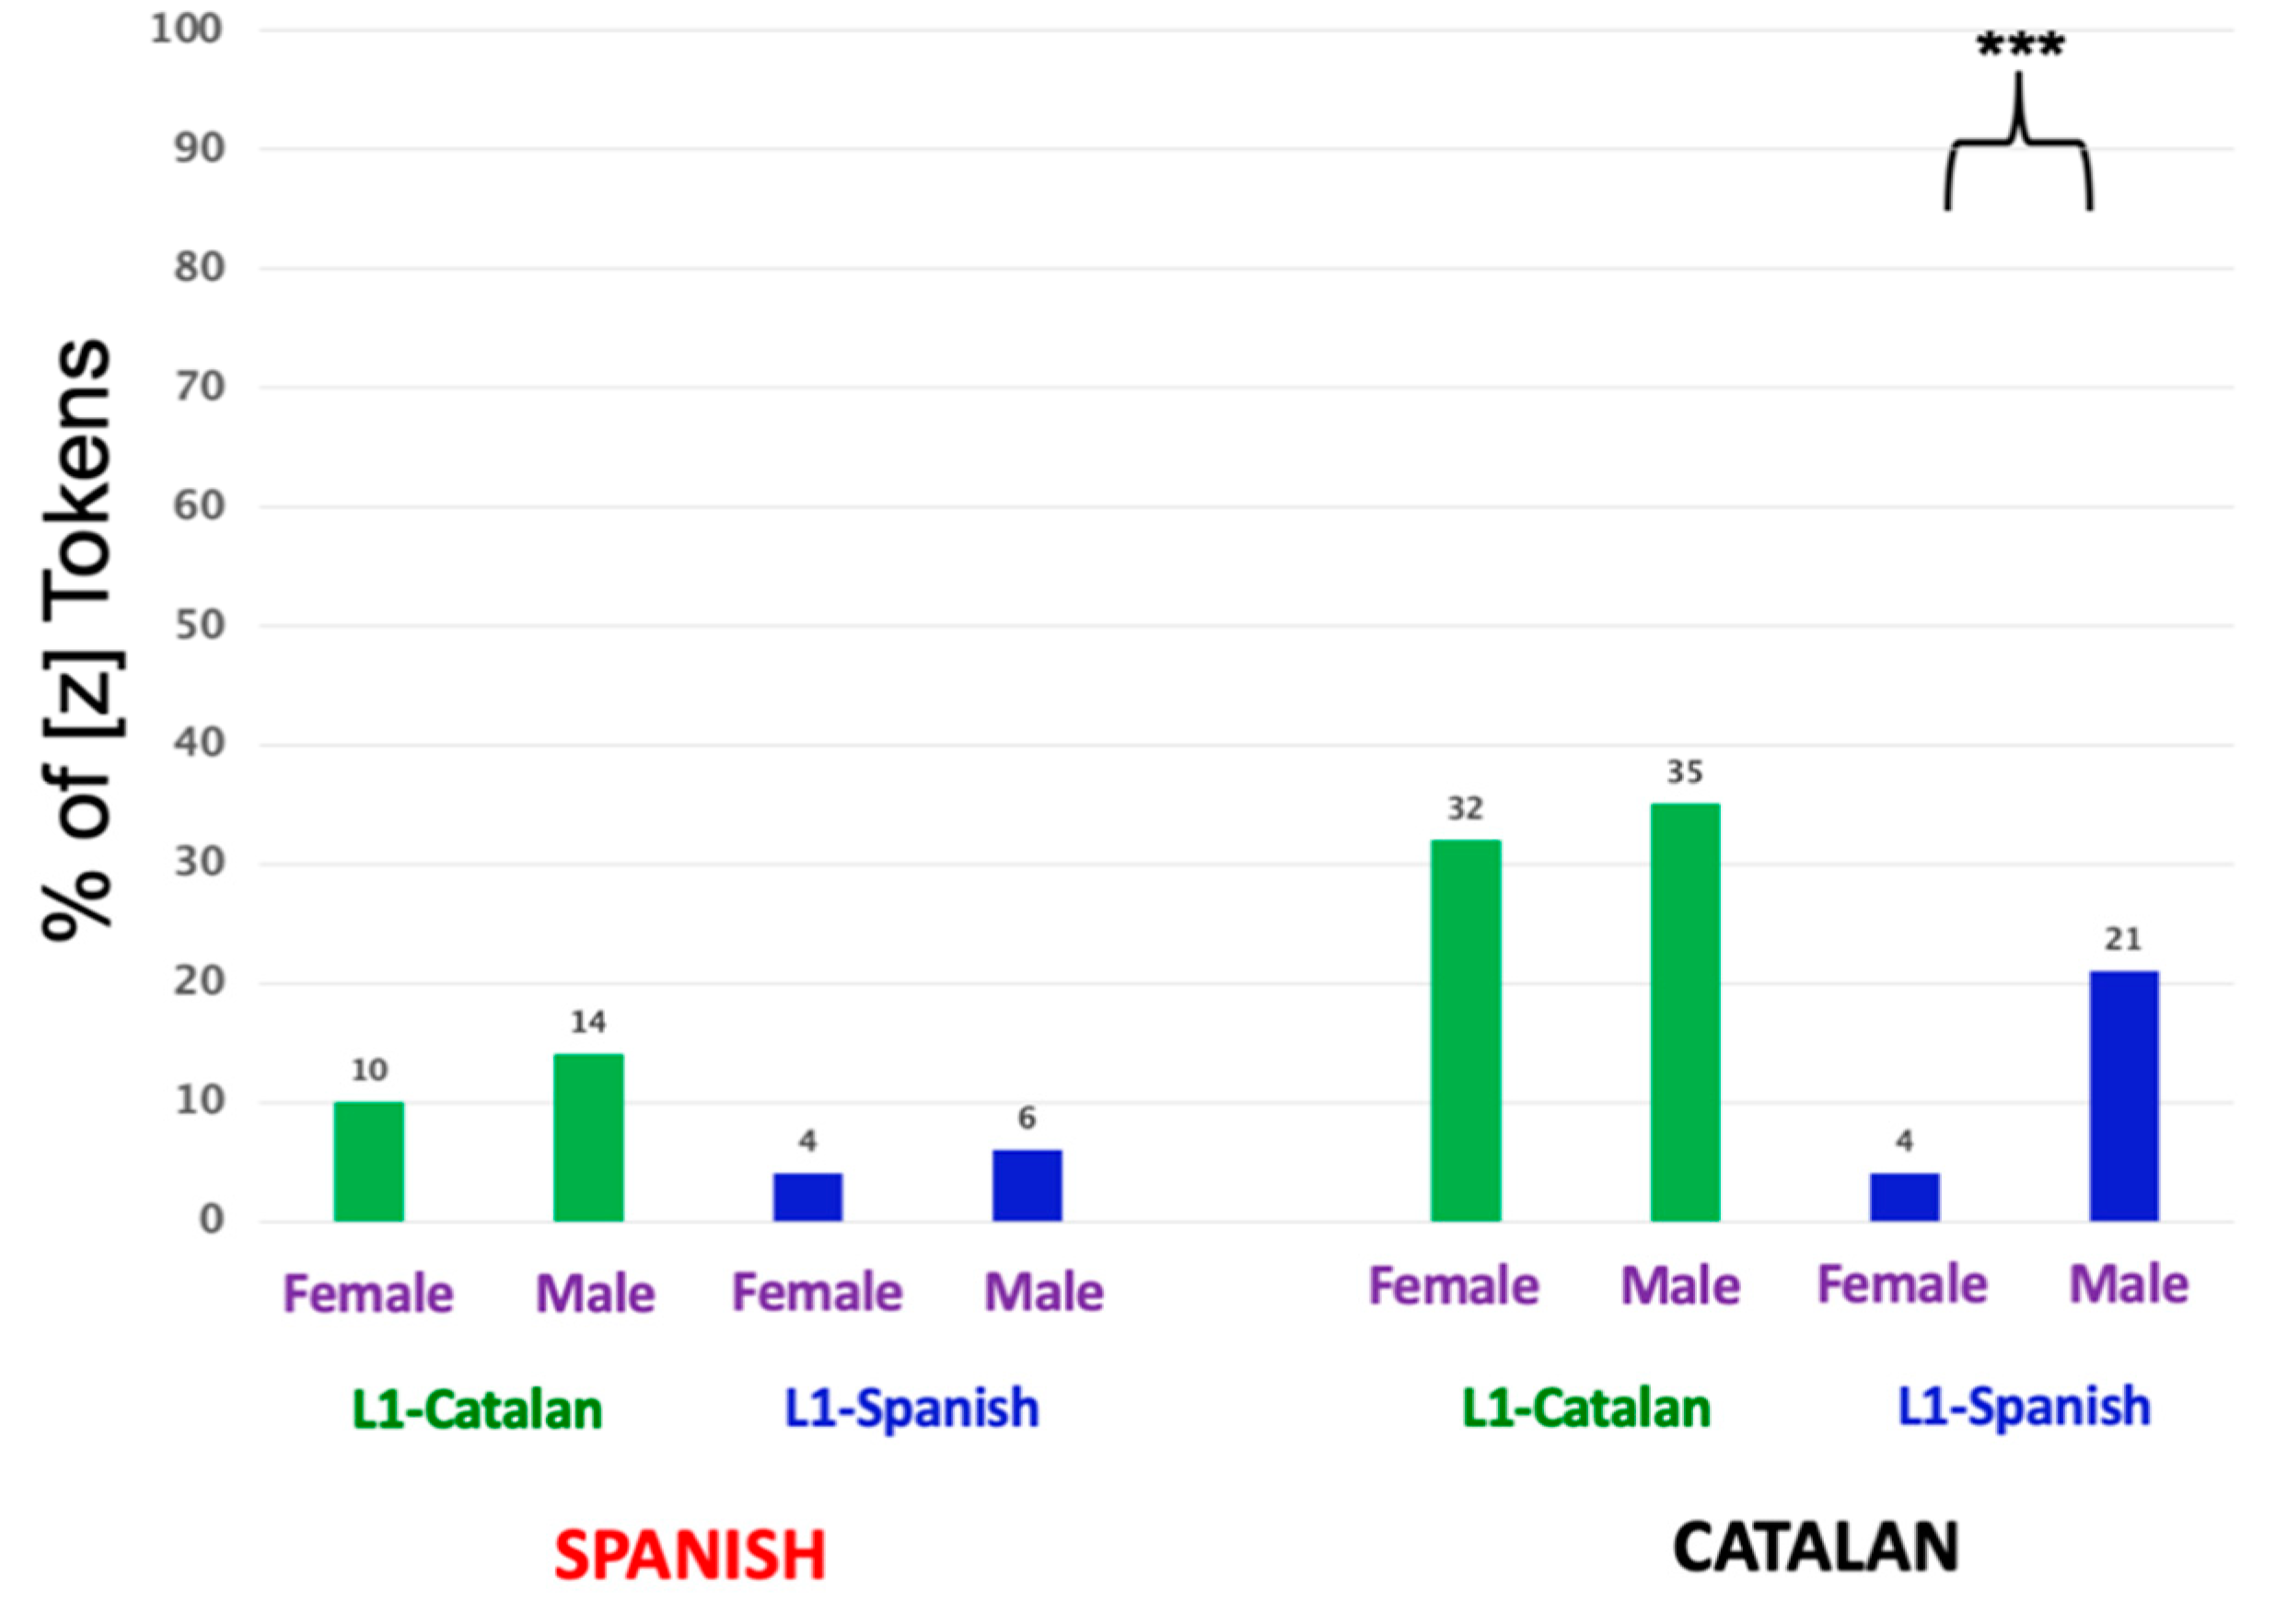 The languages in Barcelona and Catalonia